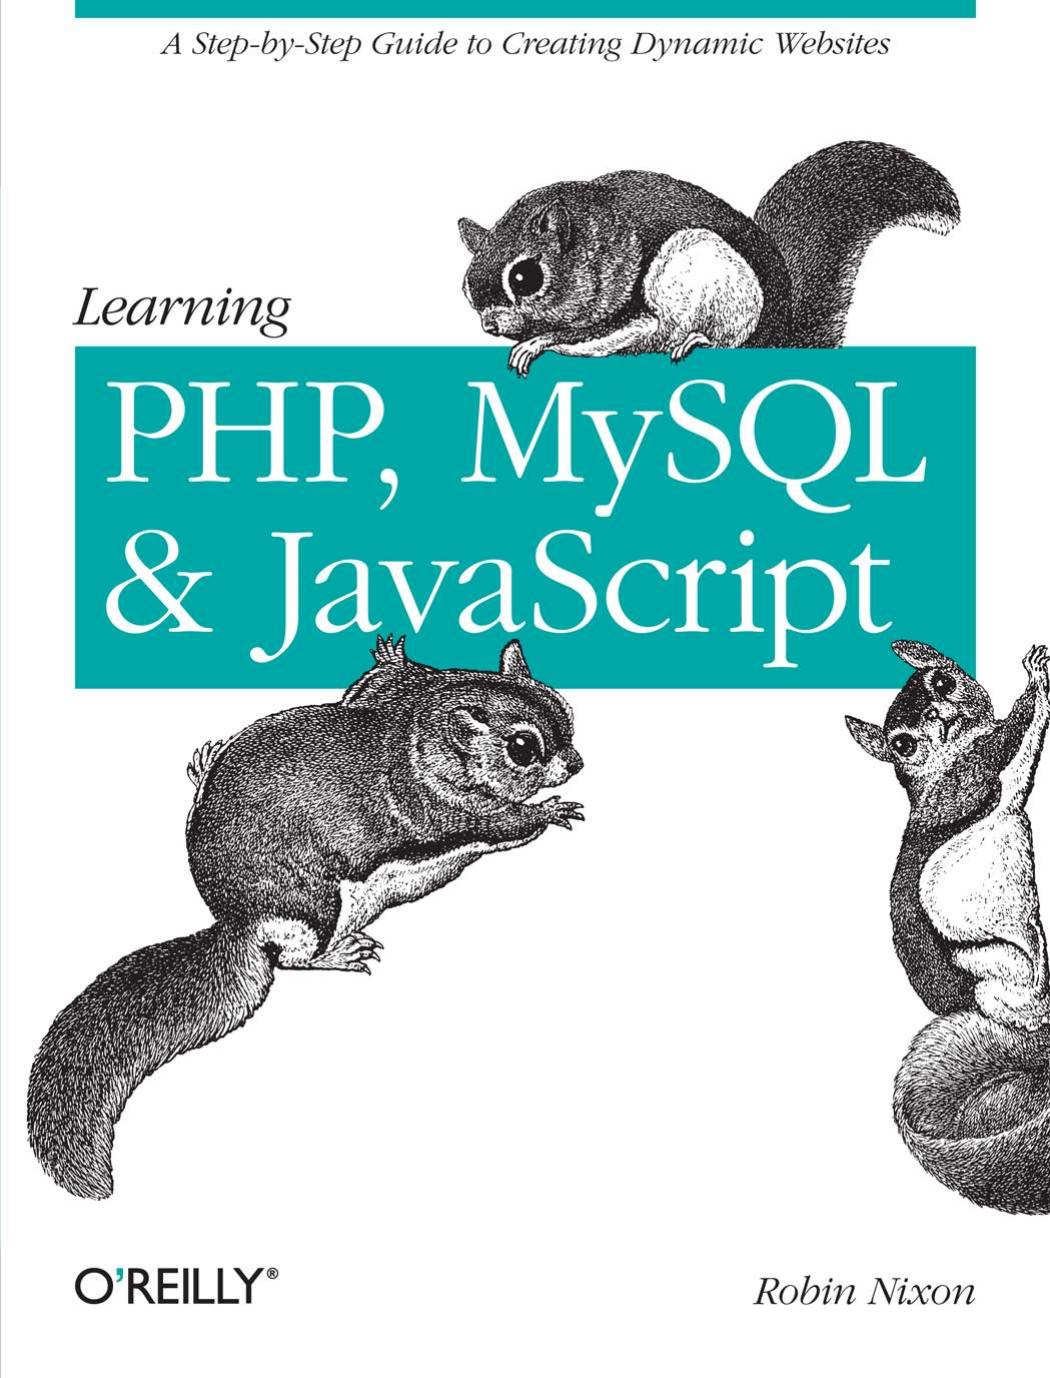 Learning PHP, MySQL, and JavaScript by Robin Nixon